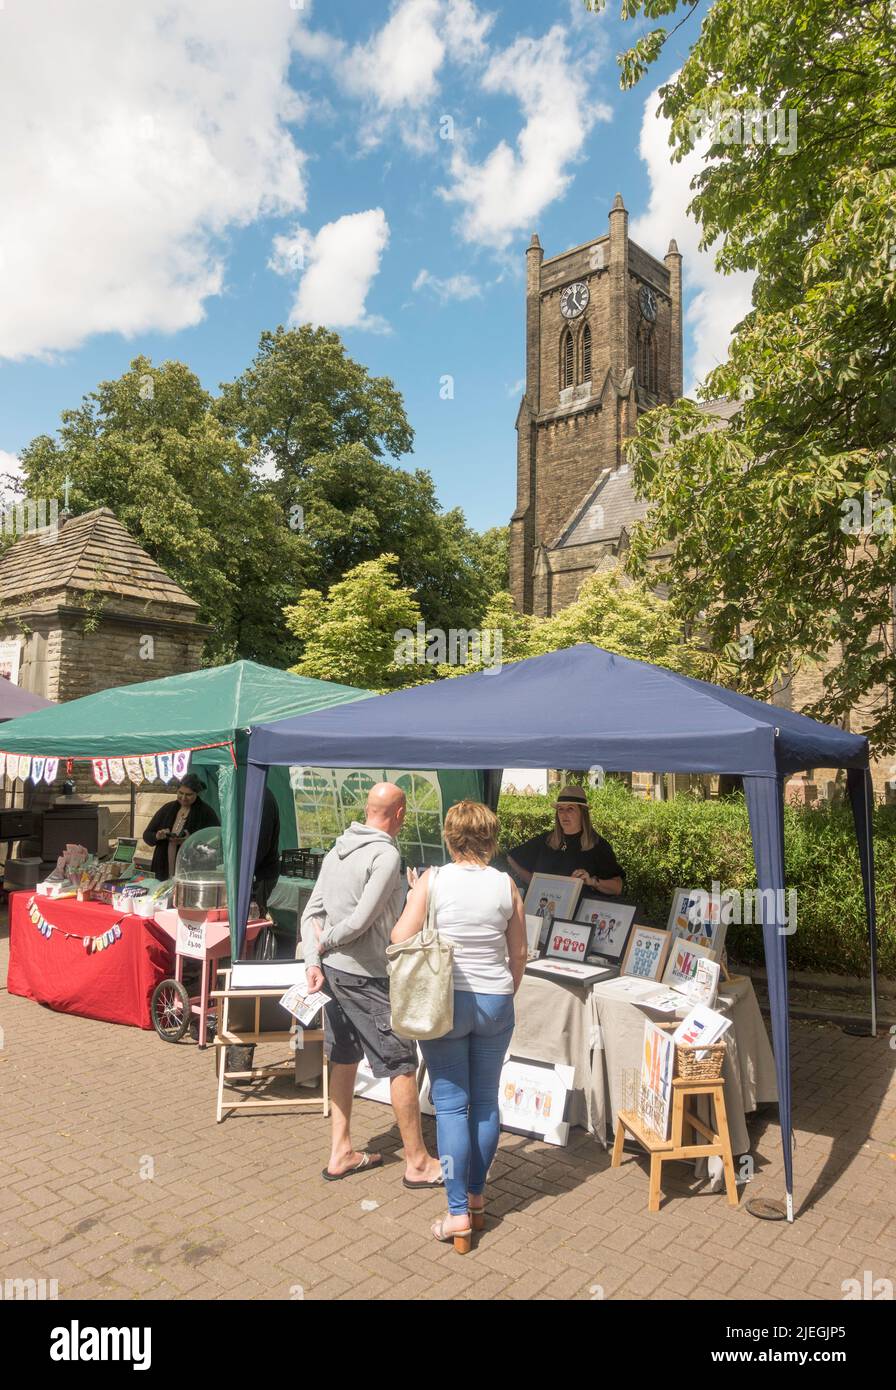 People shopping at the Artisan Market near St John's church in Heaton Mersey, Greater Manchester, England, UK Stock Photo